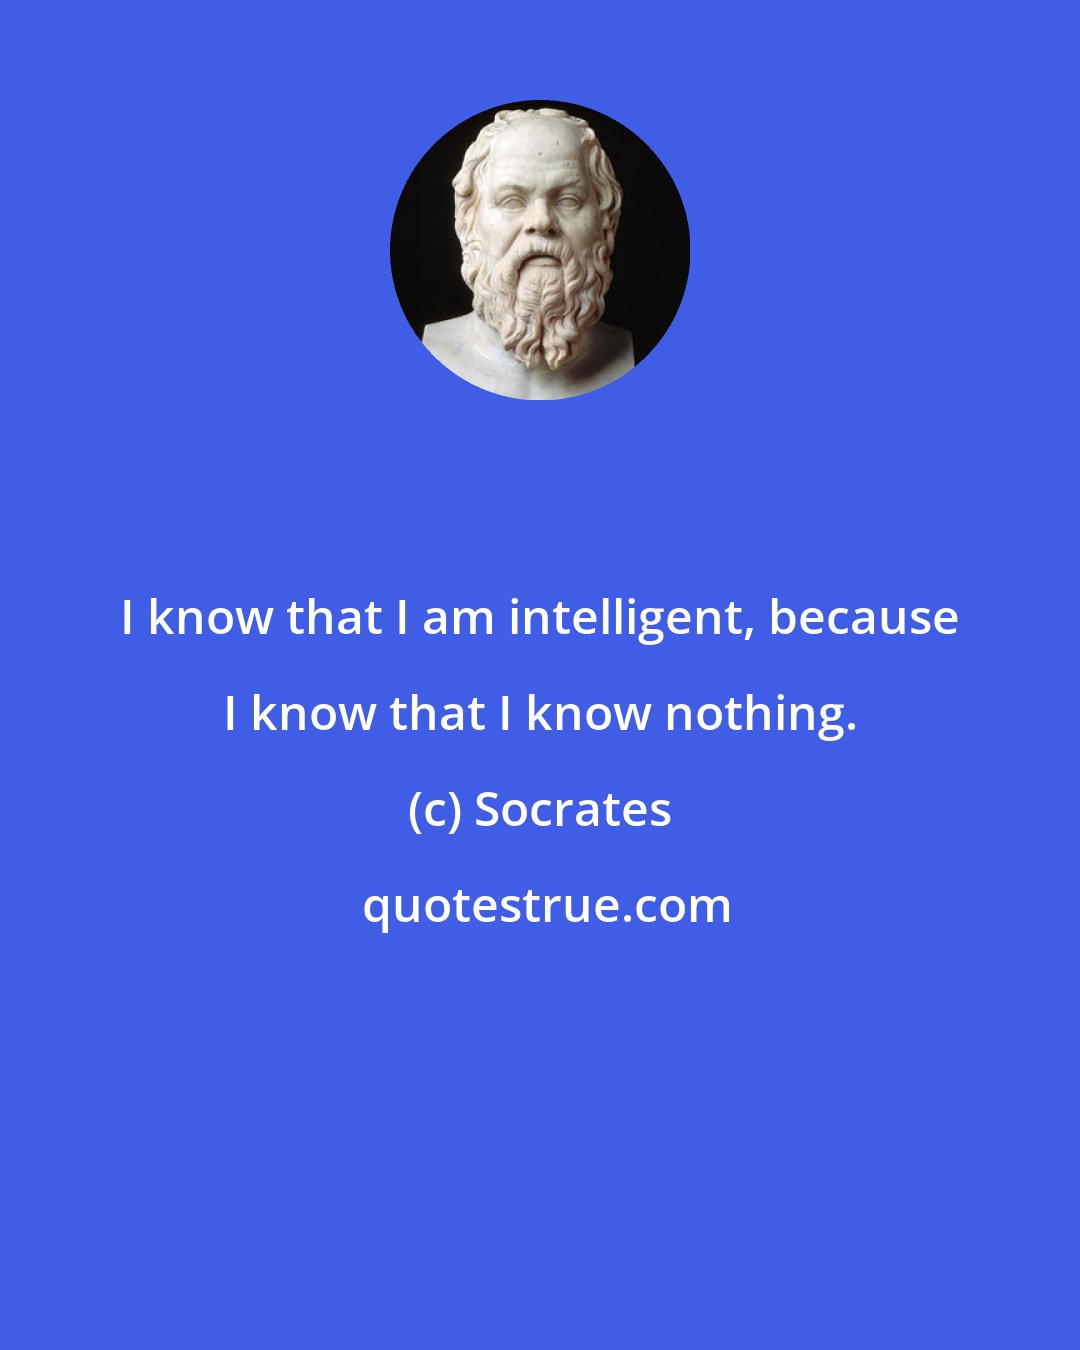 Socrates: I know that I am intelligent, because I know that I know nothing.